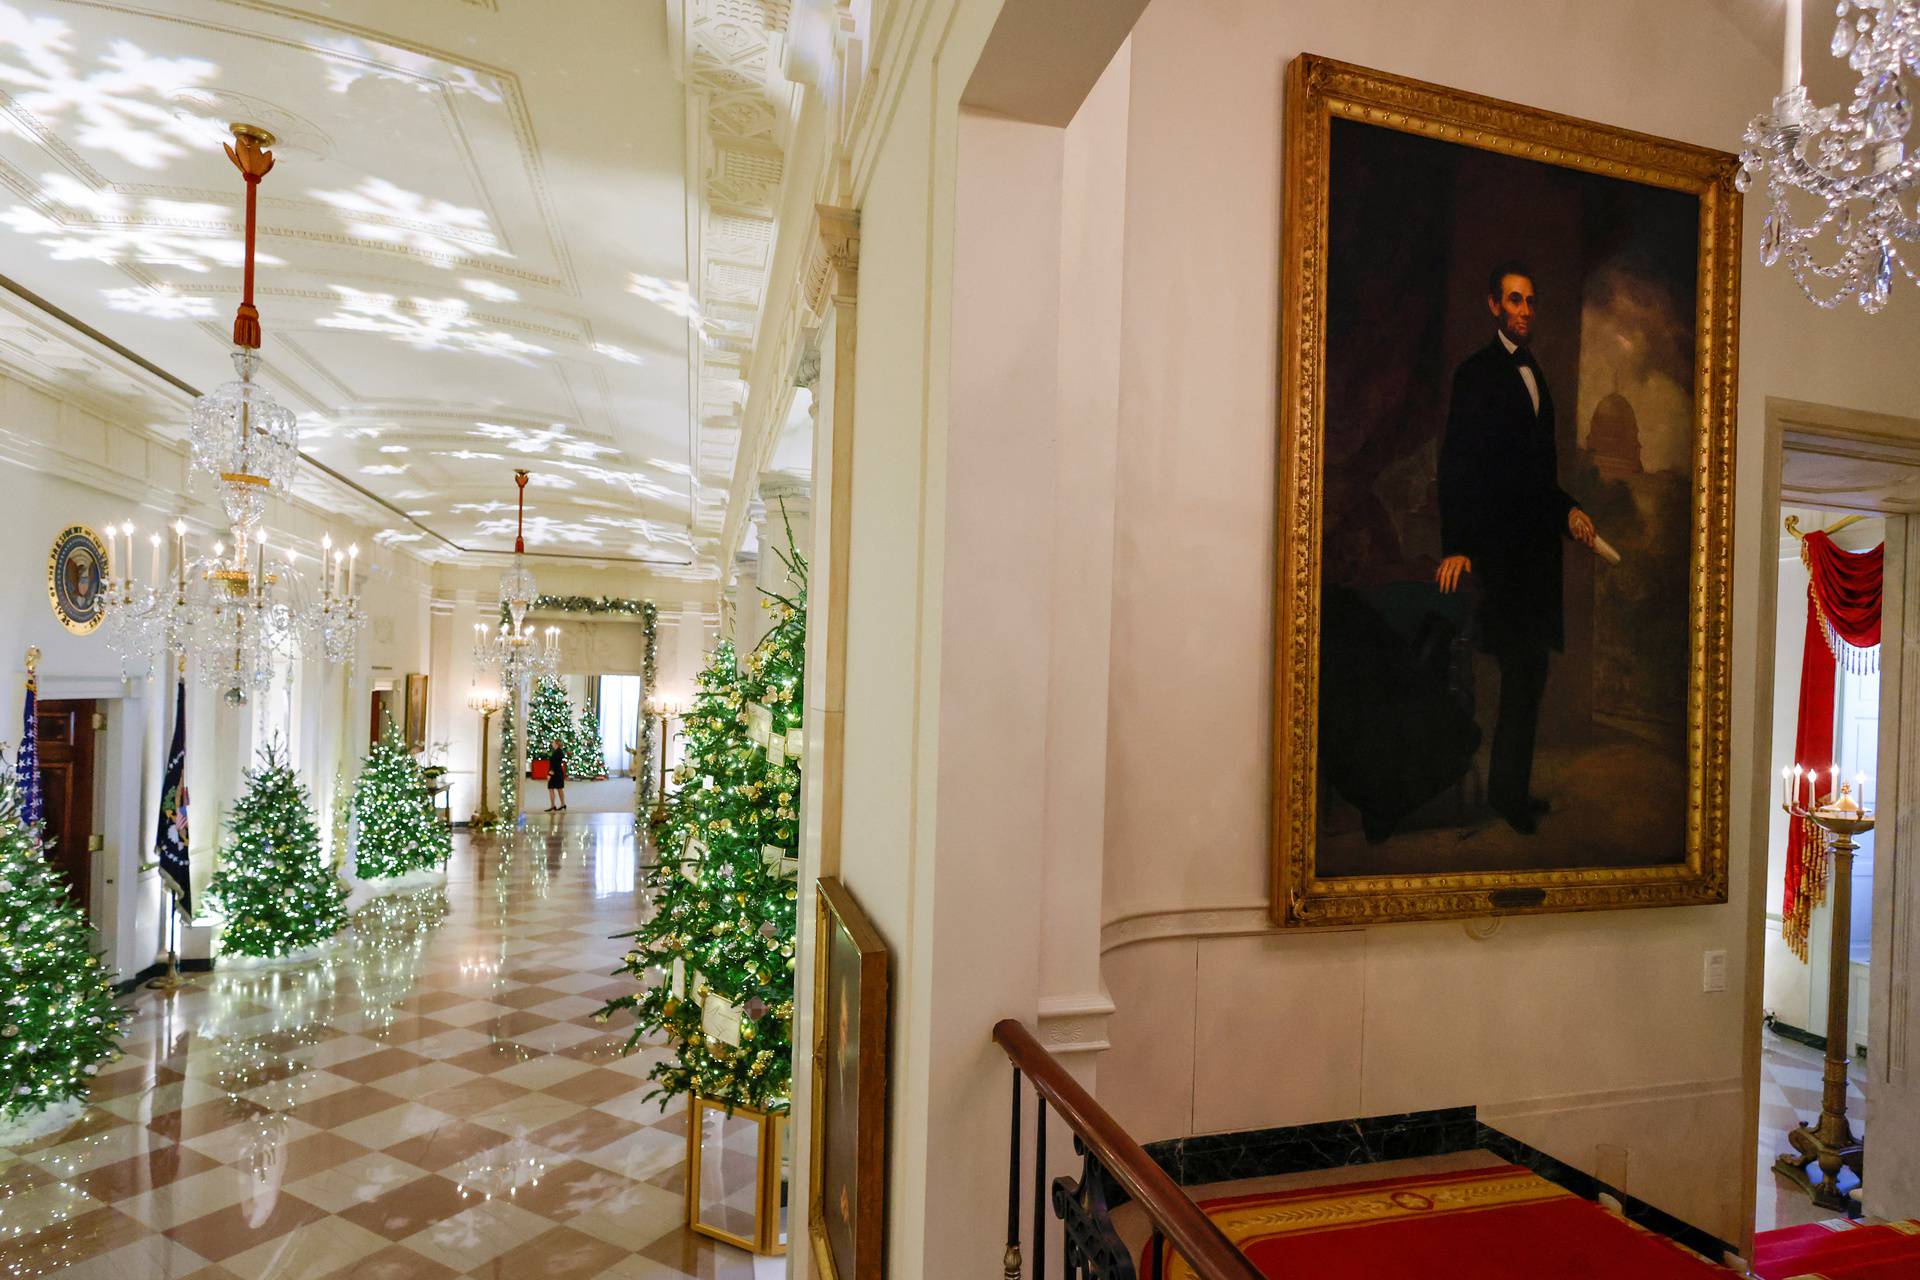 Christmas decorations on the theme "We the People" are unveiled at the White House